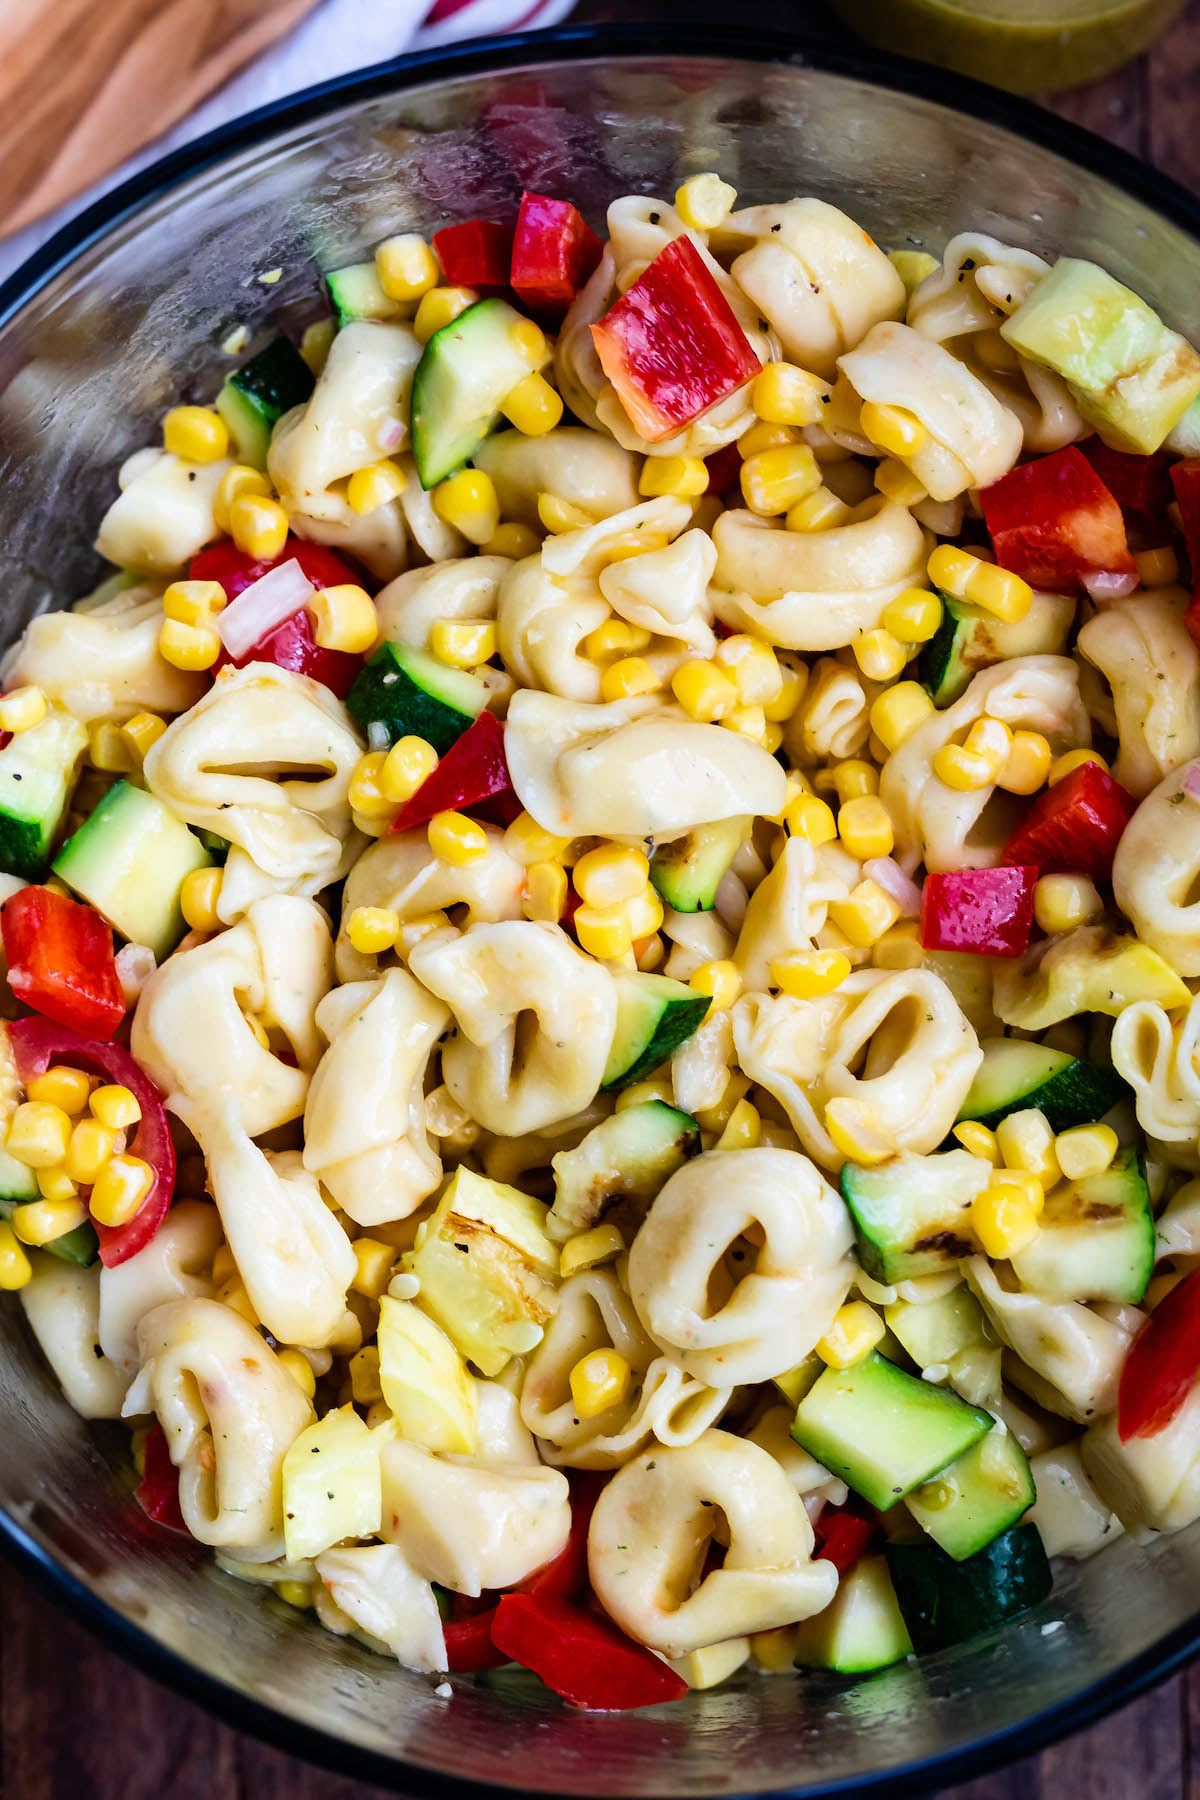 corn and zucchini and peppers and pasta and tomatoes all mixed together in a clear bowl